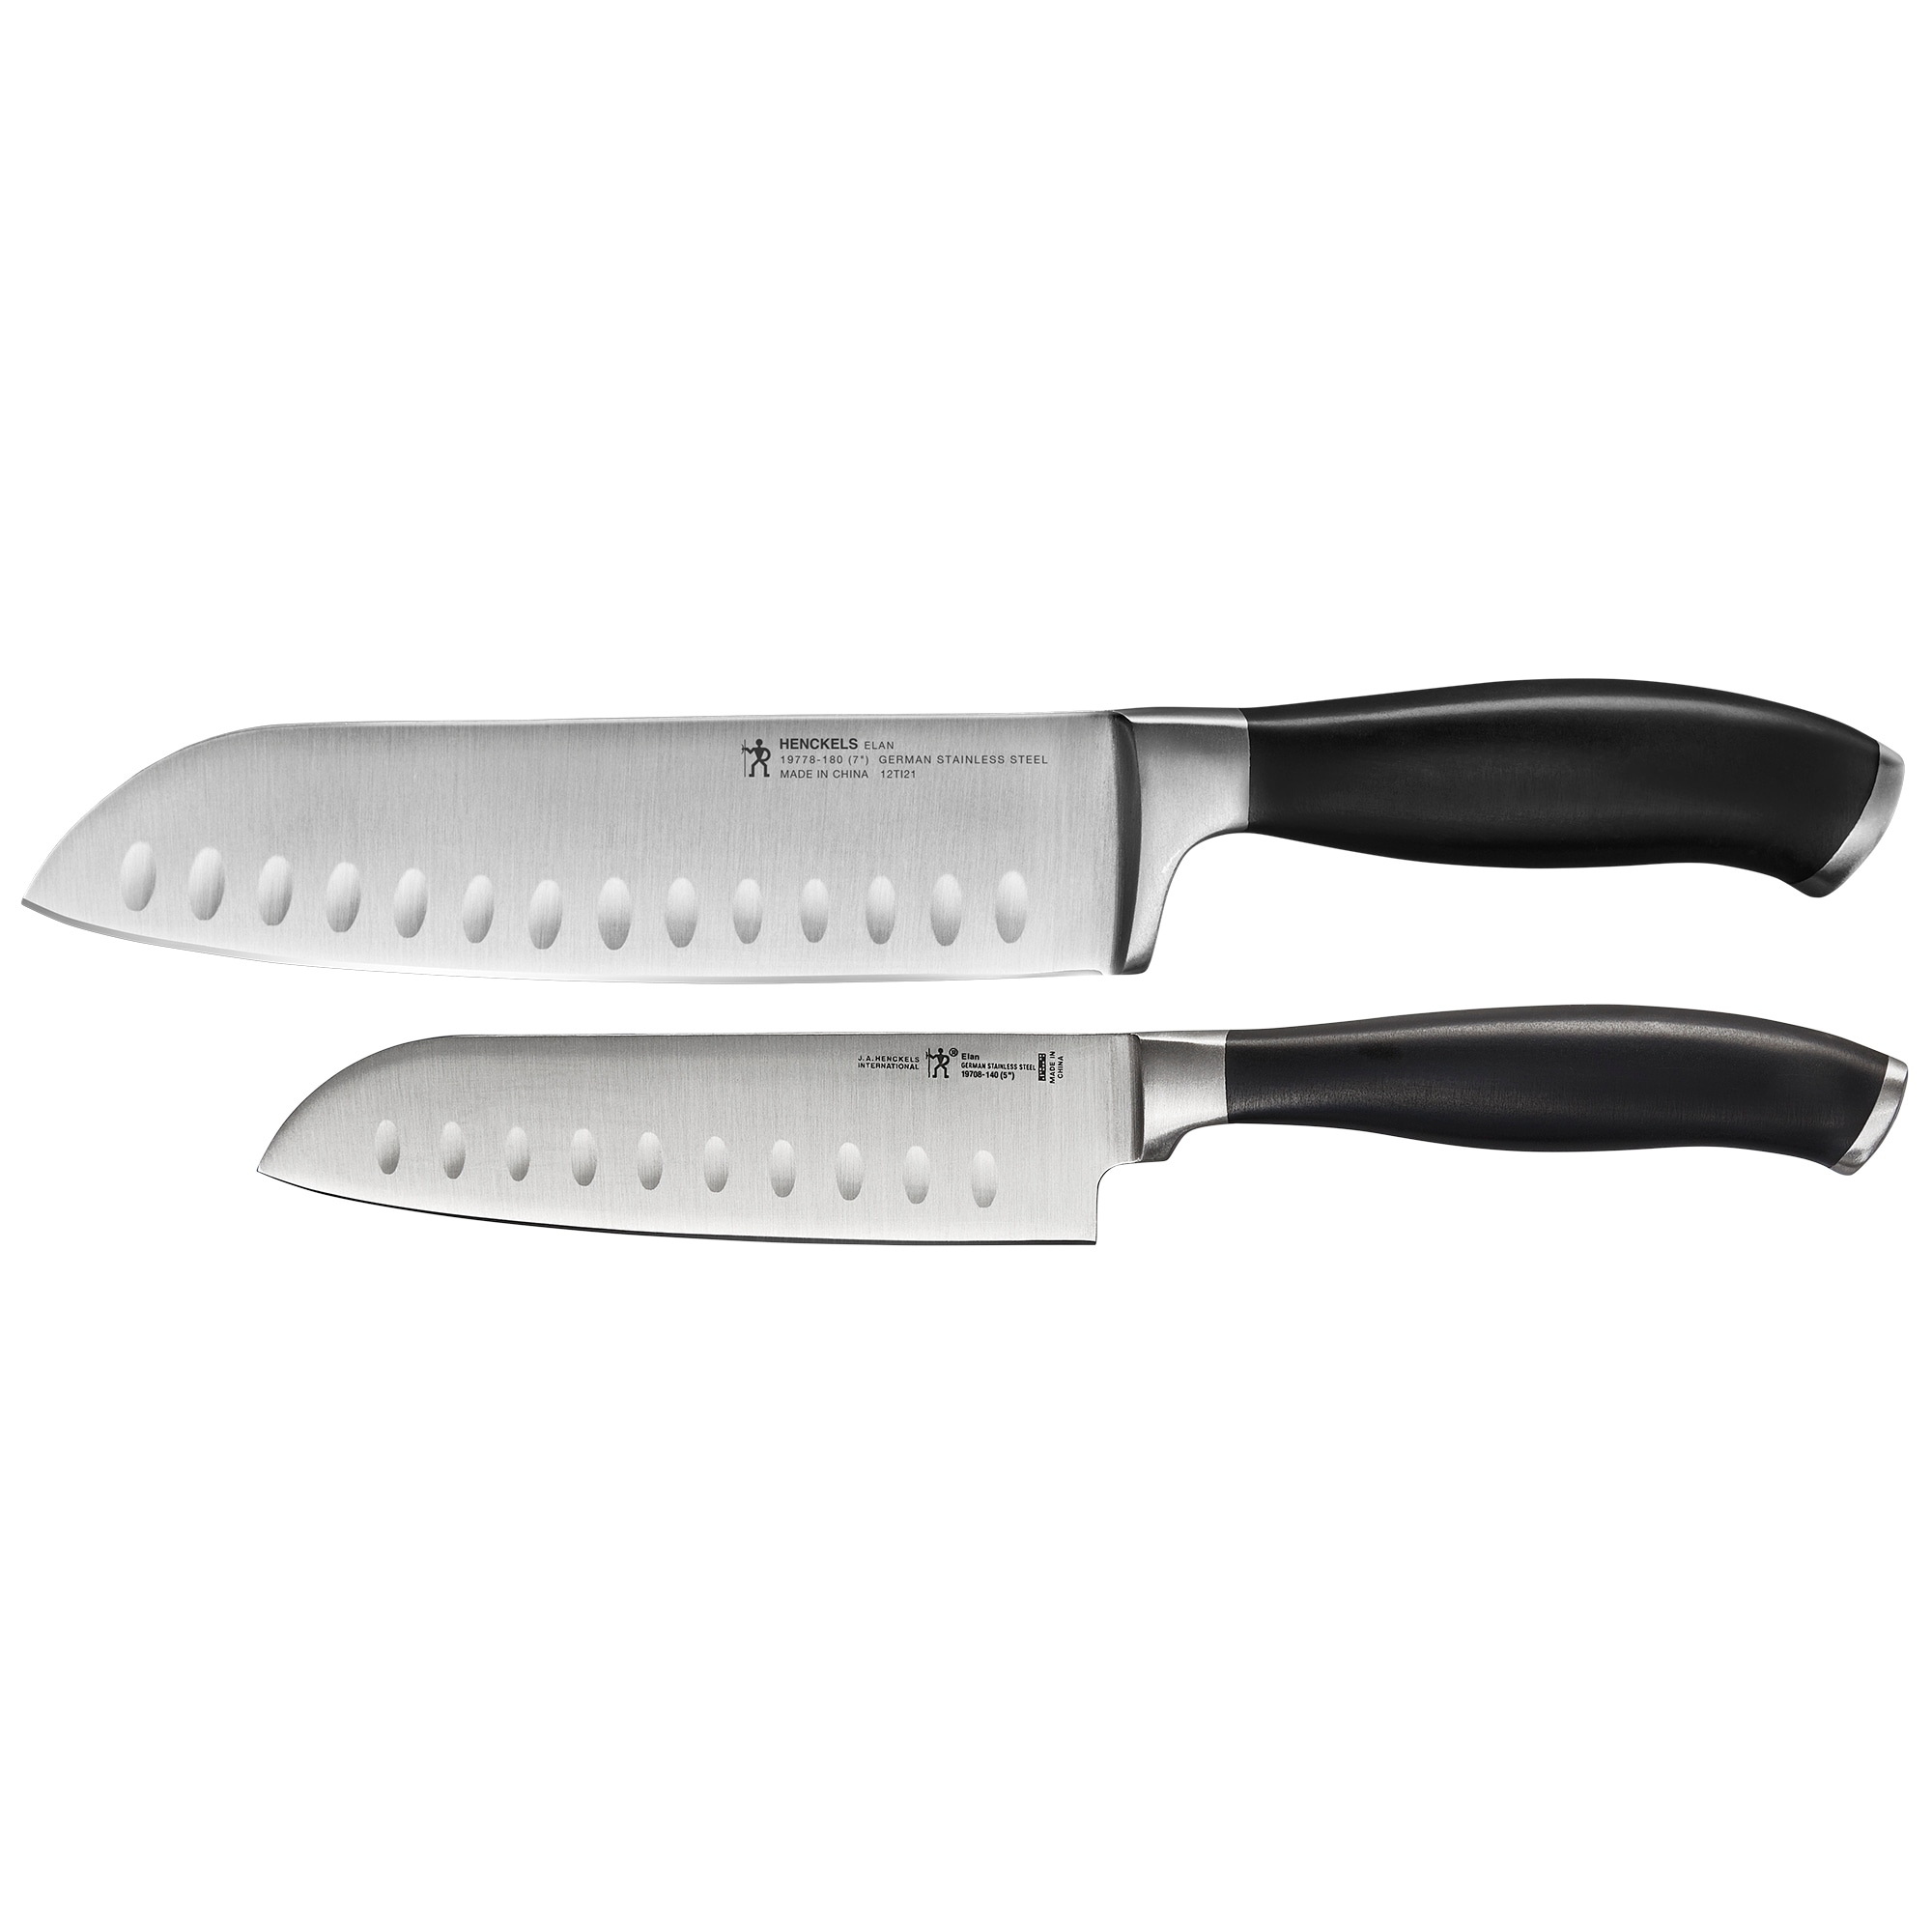 https://ak1.ostkcdn.com/images/products/is/images/direct/d68802a086dd97e23d3d35048a36a163e3c98a50/Henckels-Elan-2-pc-Asian-Knife-Set.jpg